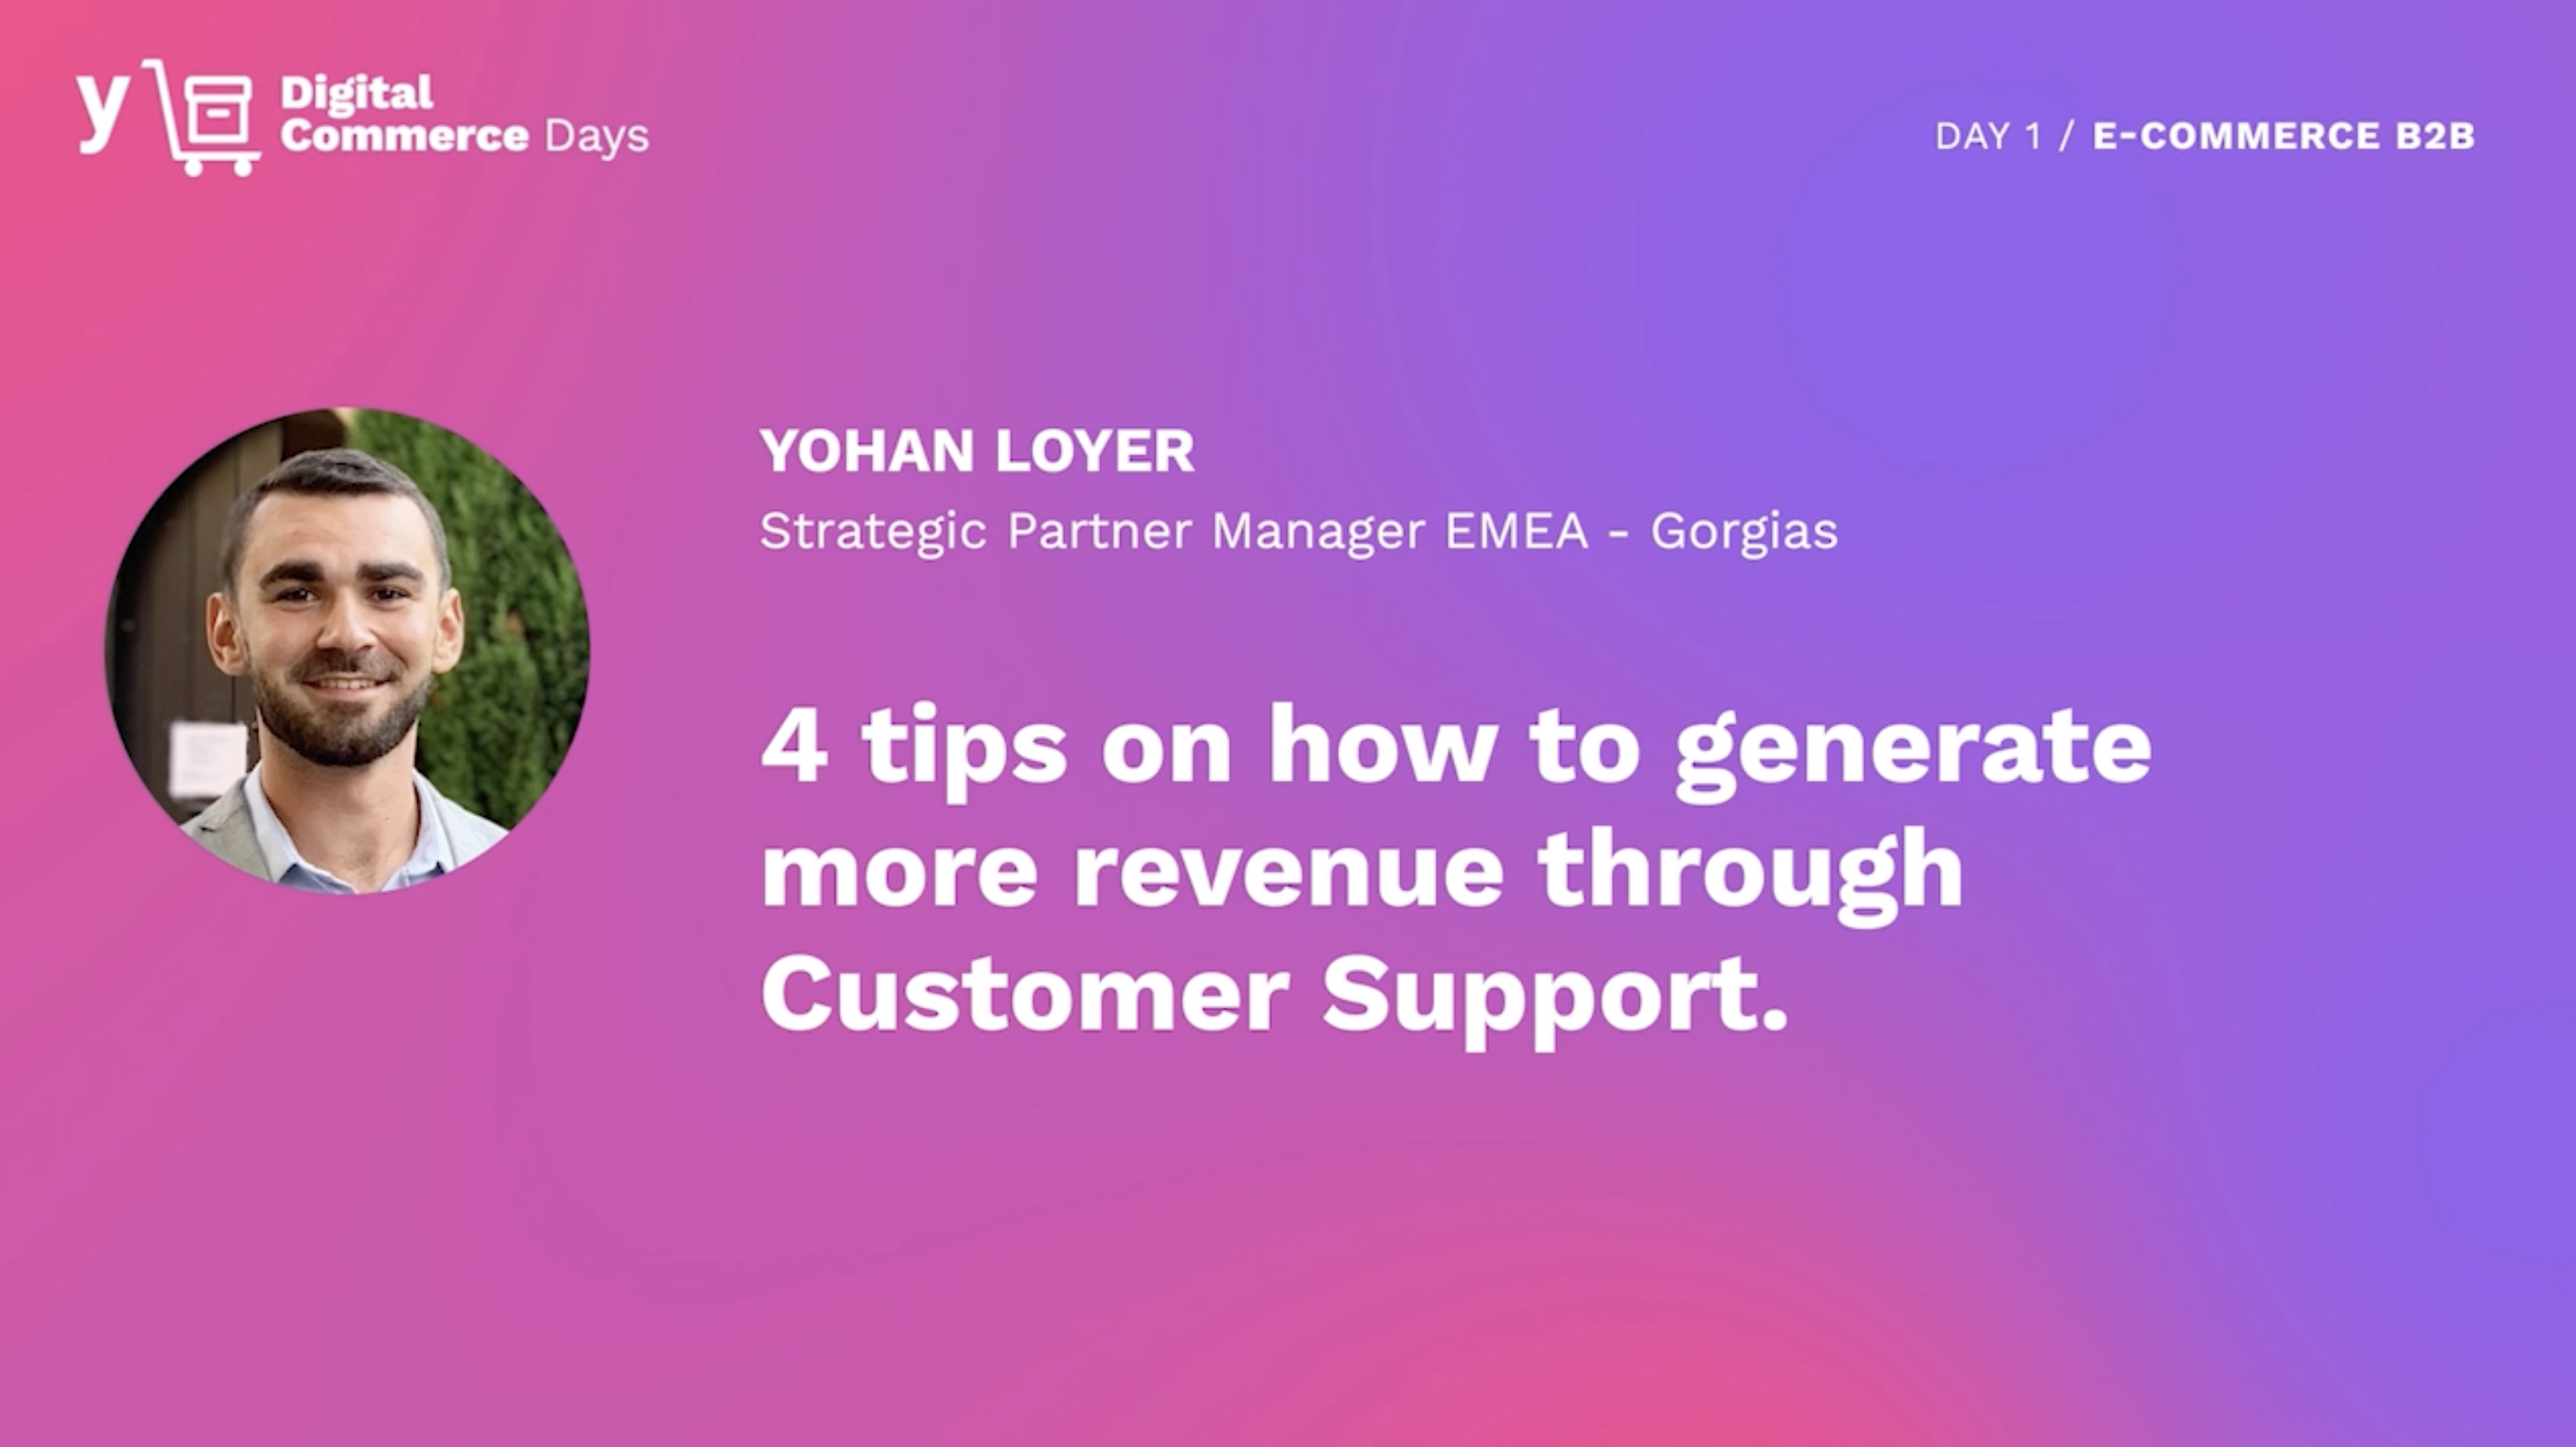 Video on four tips for generate more revenue through customer support